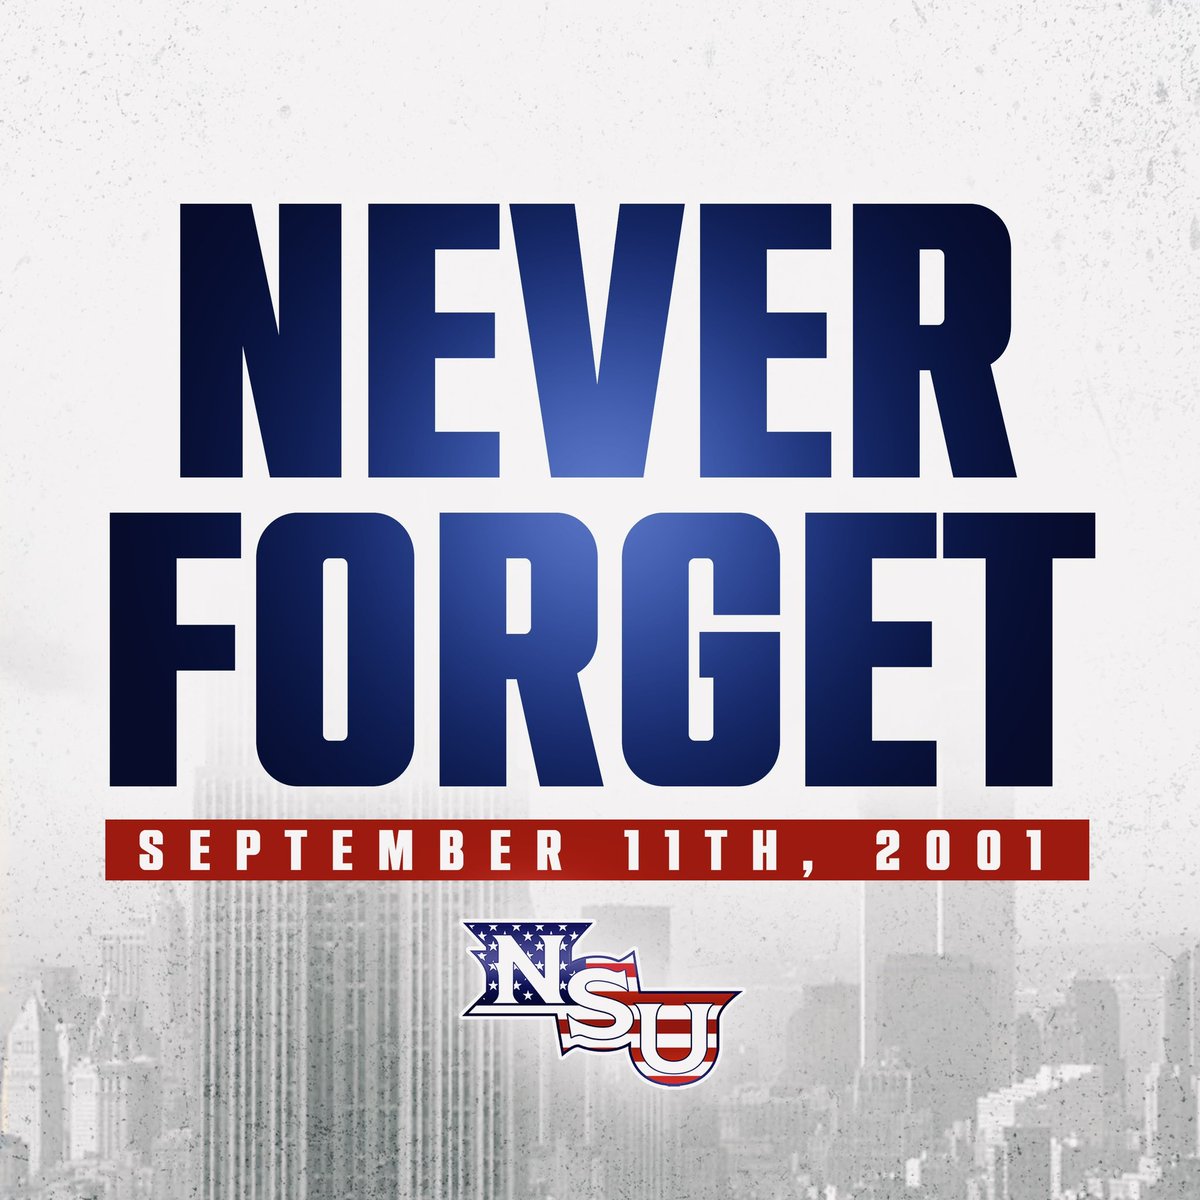 The Demon family remembers and honors all who lost their lives on September 11, 2001. We will never forget. 🇺🇸